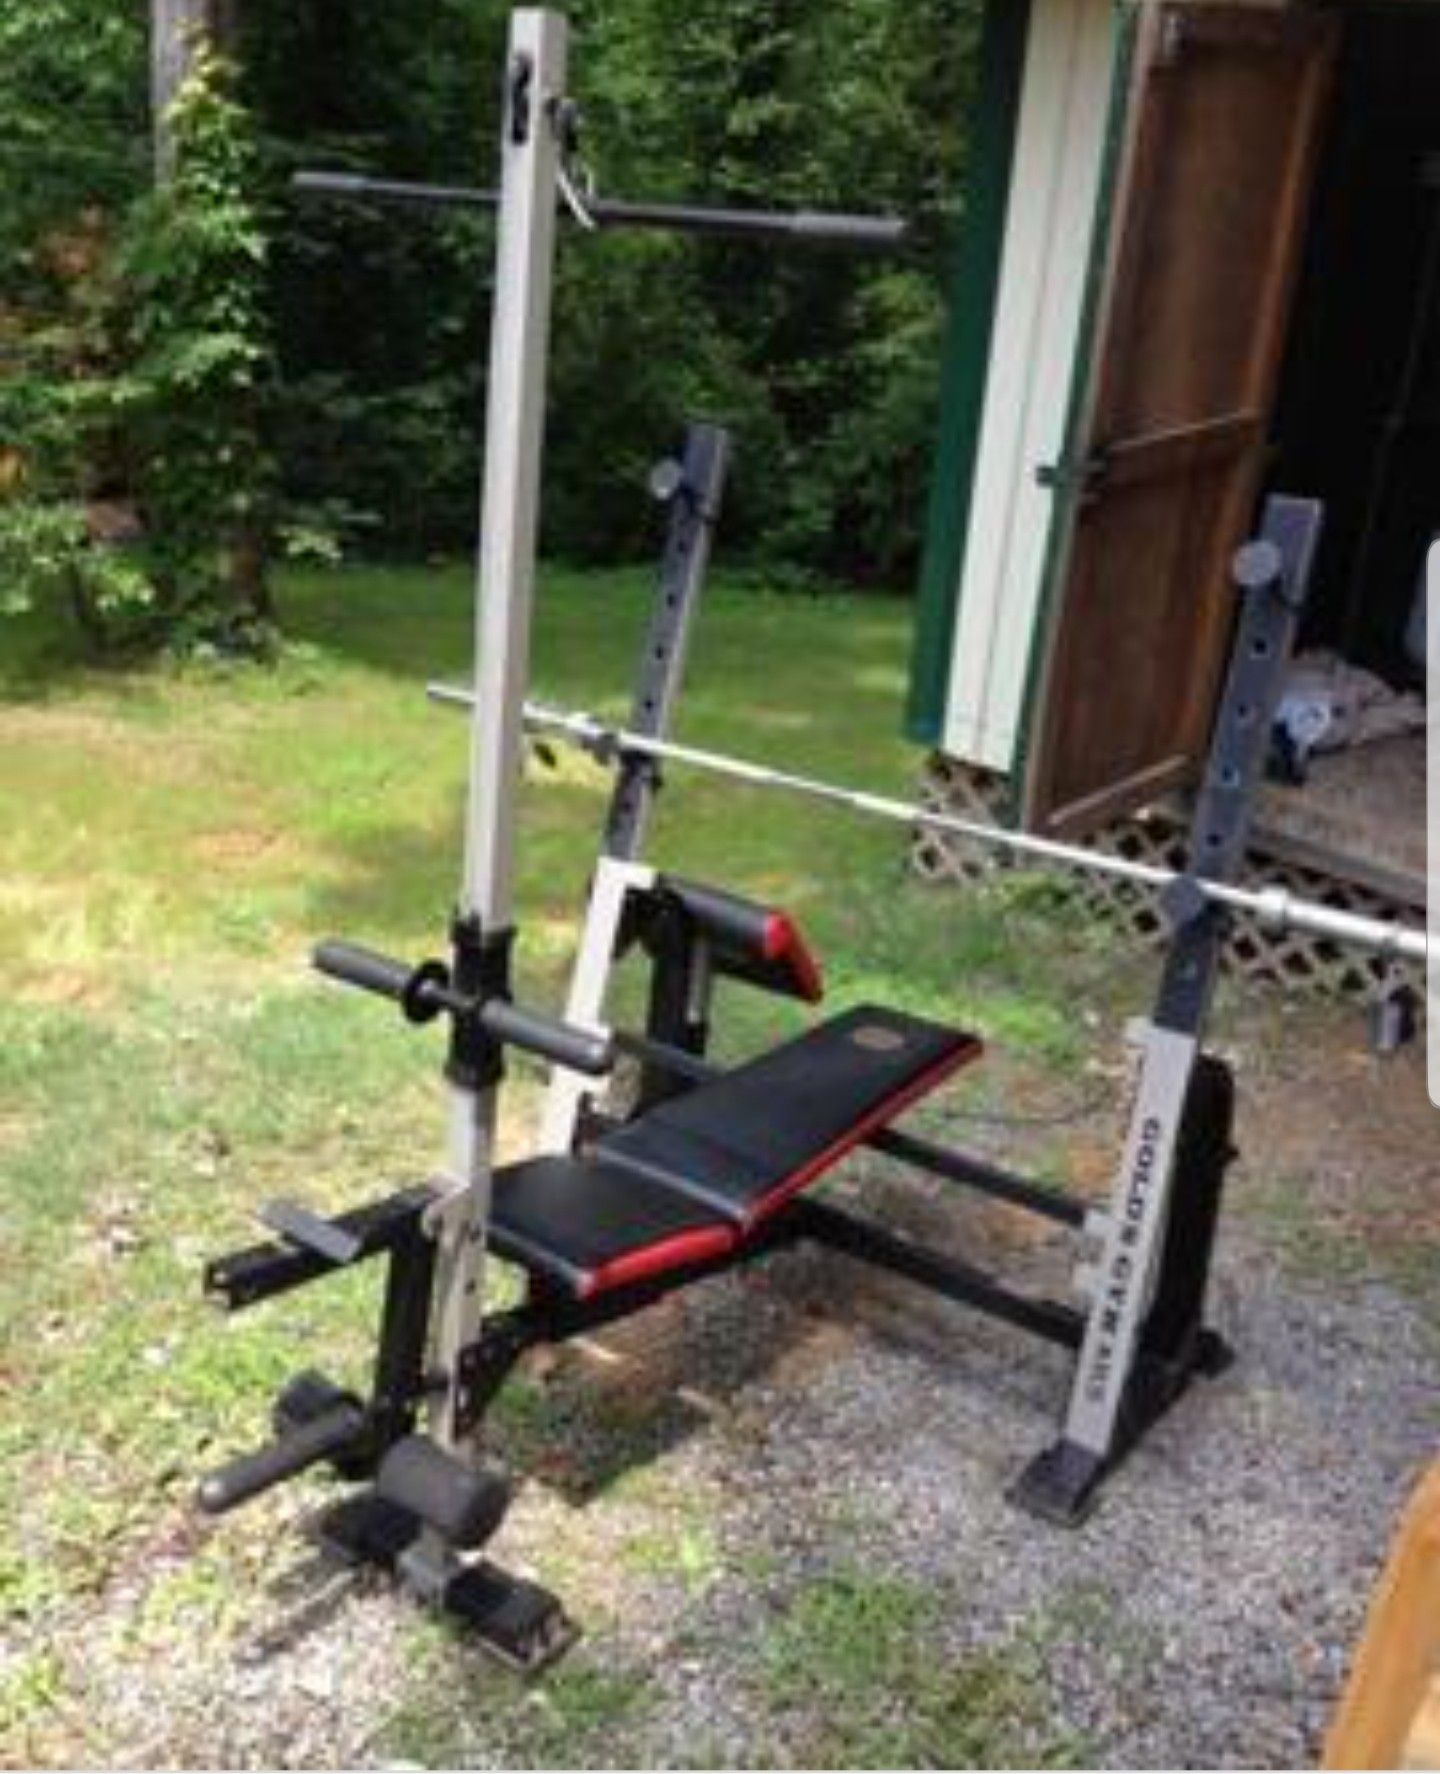 Gold gym bench comes with lat pull down bar, leg workout, arm curl pad. Excludes bench bar or weights